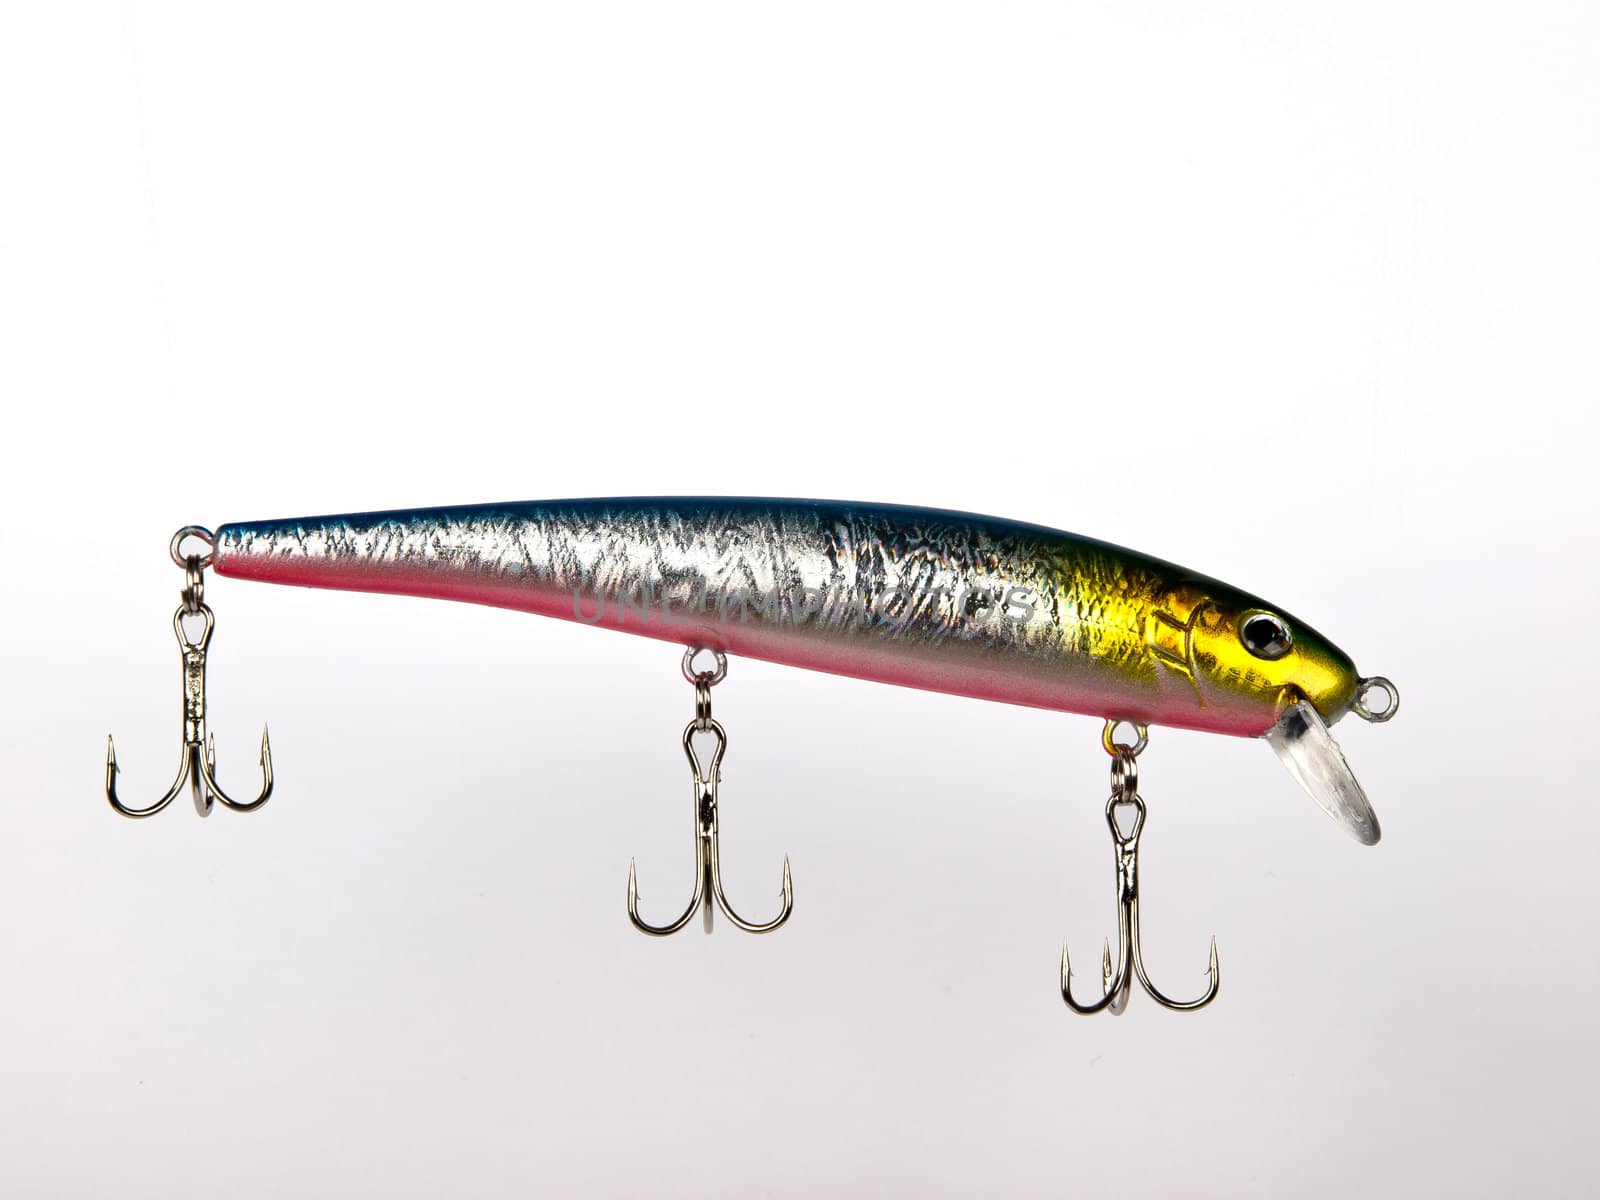 fishing lure ready for a big fish